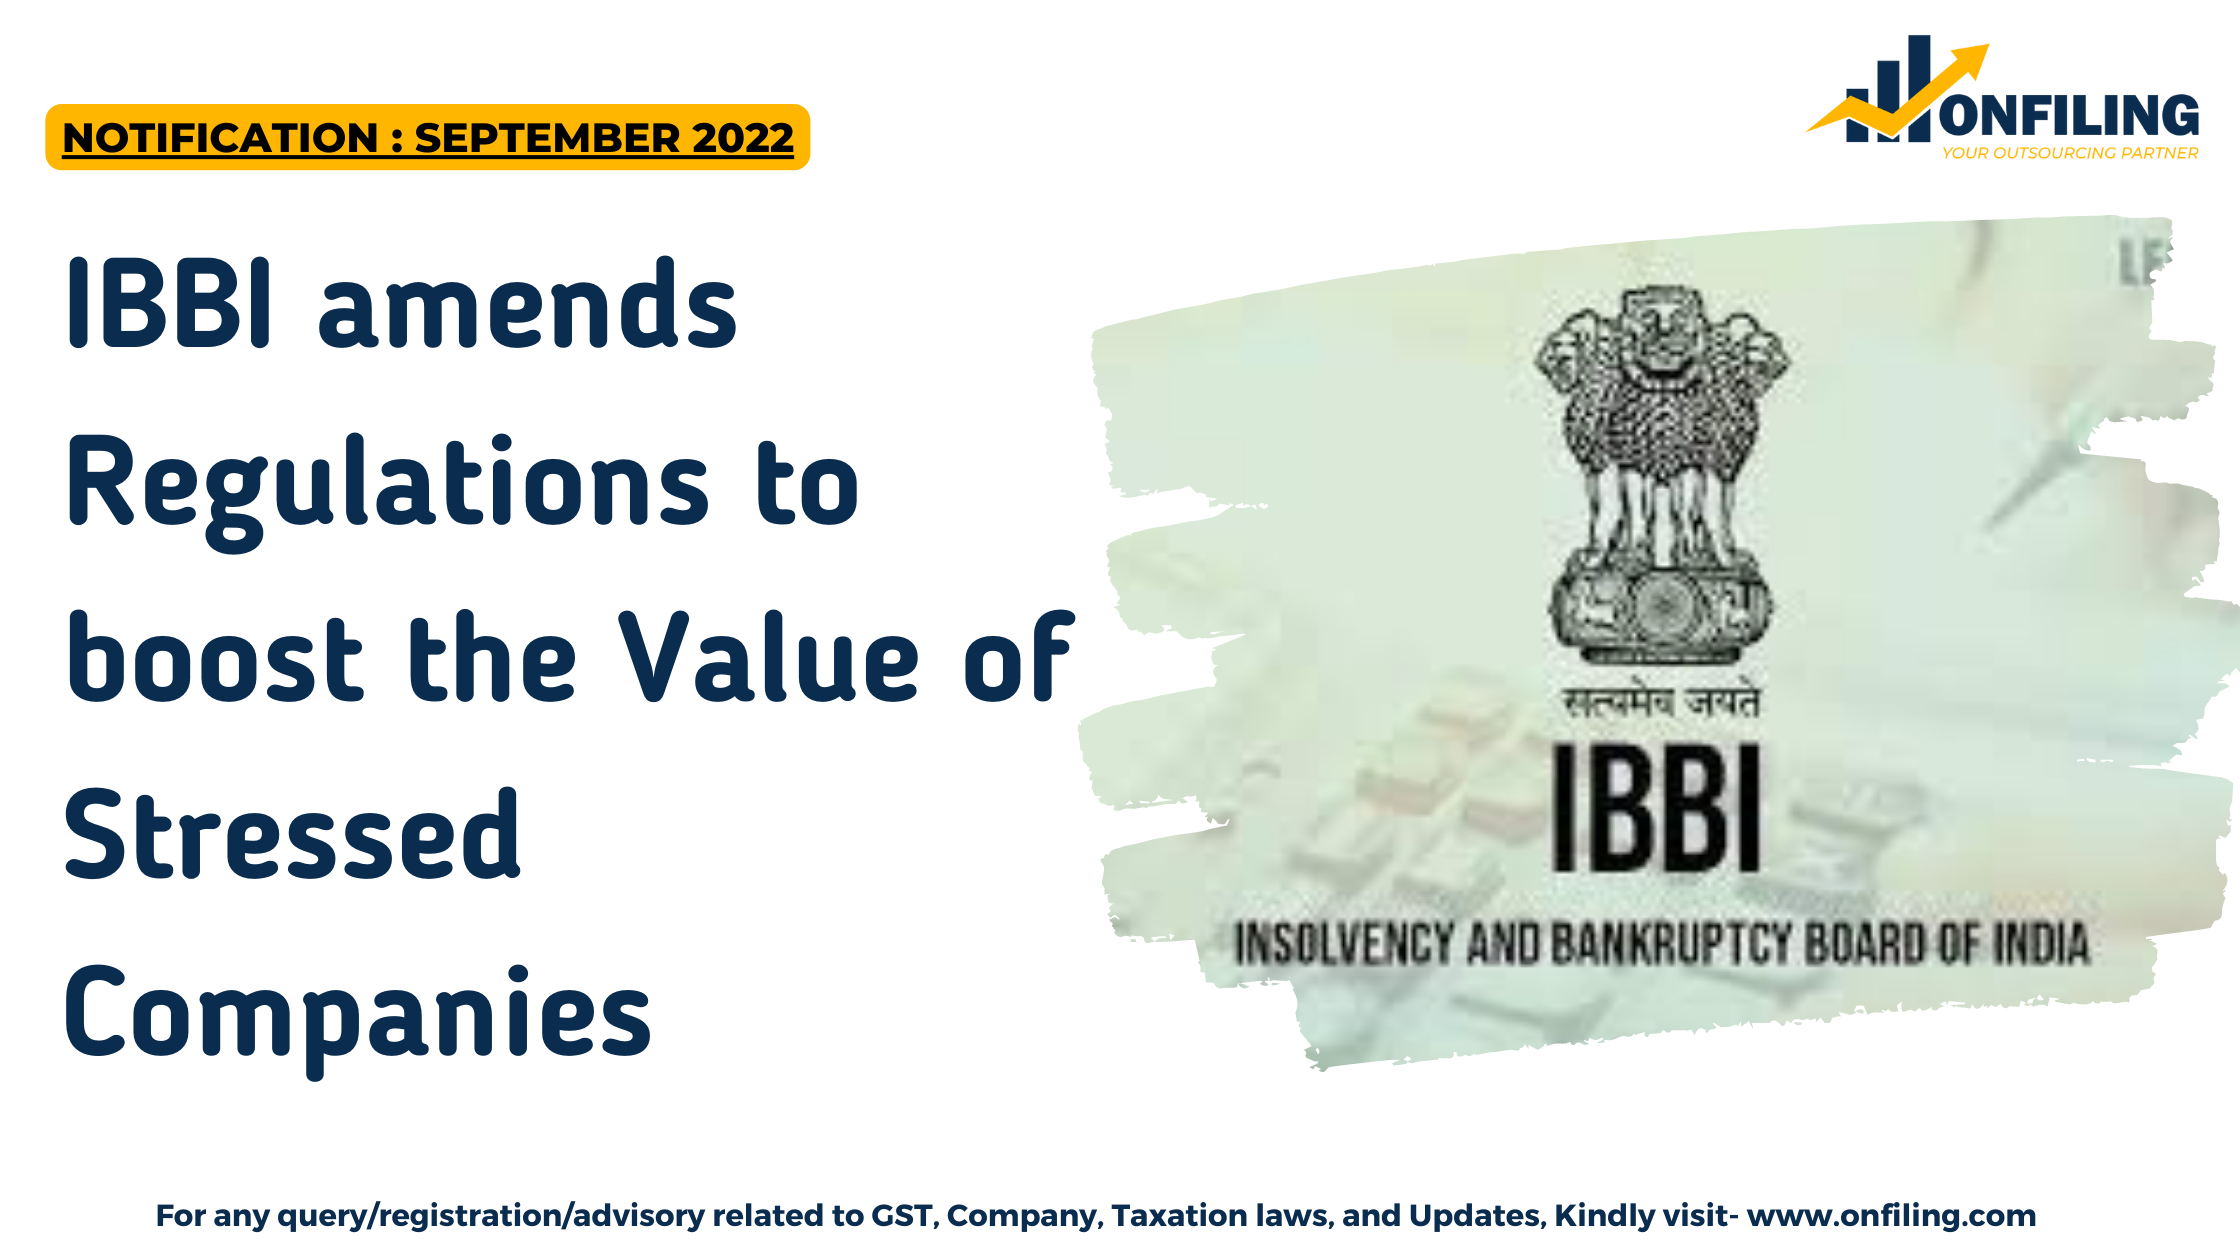 IBBI amends Regulations to boost the Value of Stressed Companies